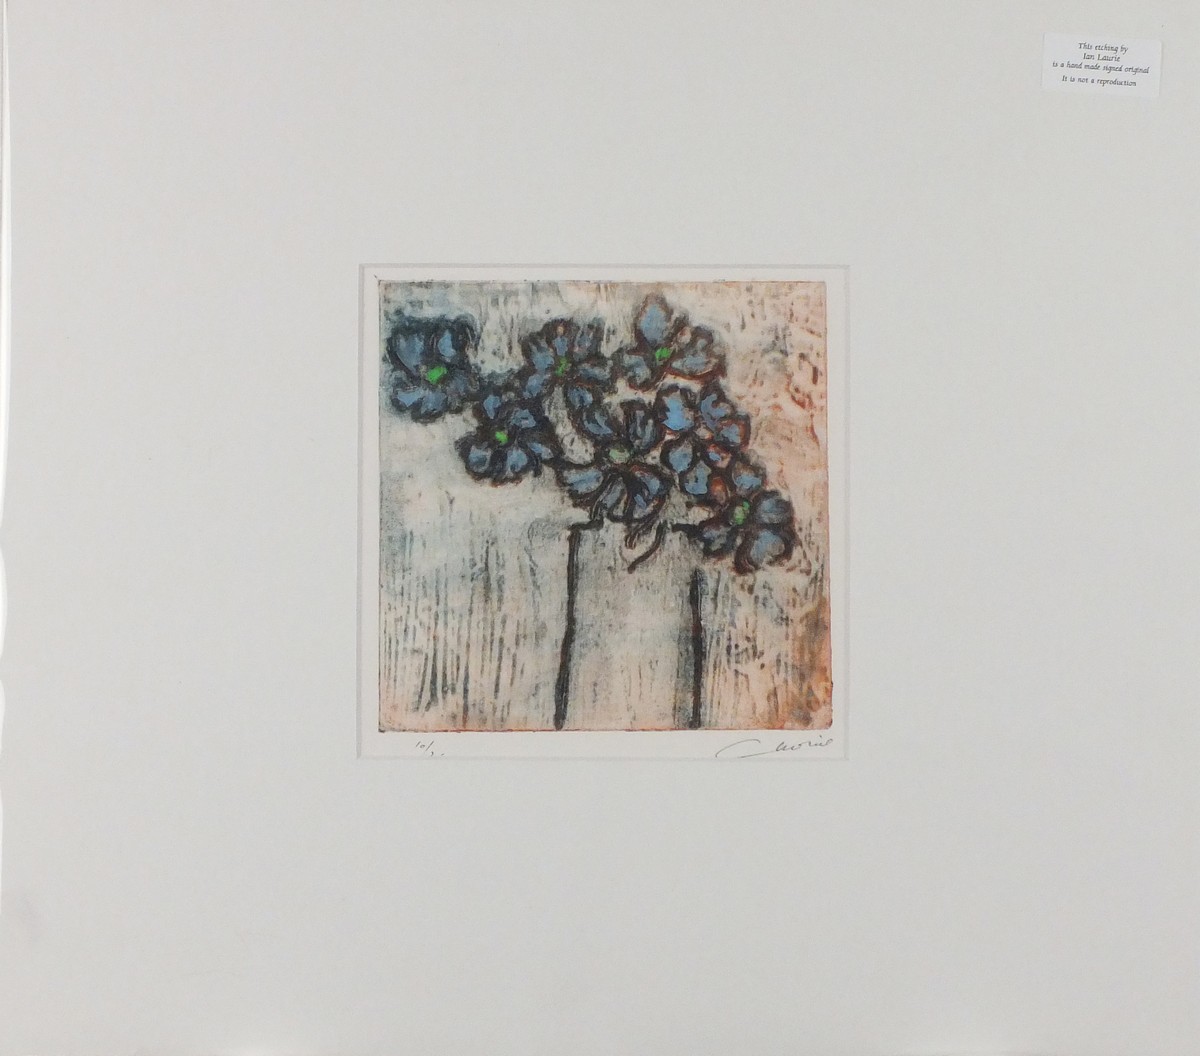 Ian LAURIE (British b. 1933) Forget-Me-Nots, Etching, Signed lower right, numbered 10/25?, 6.5" x - Image 2 of 2